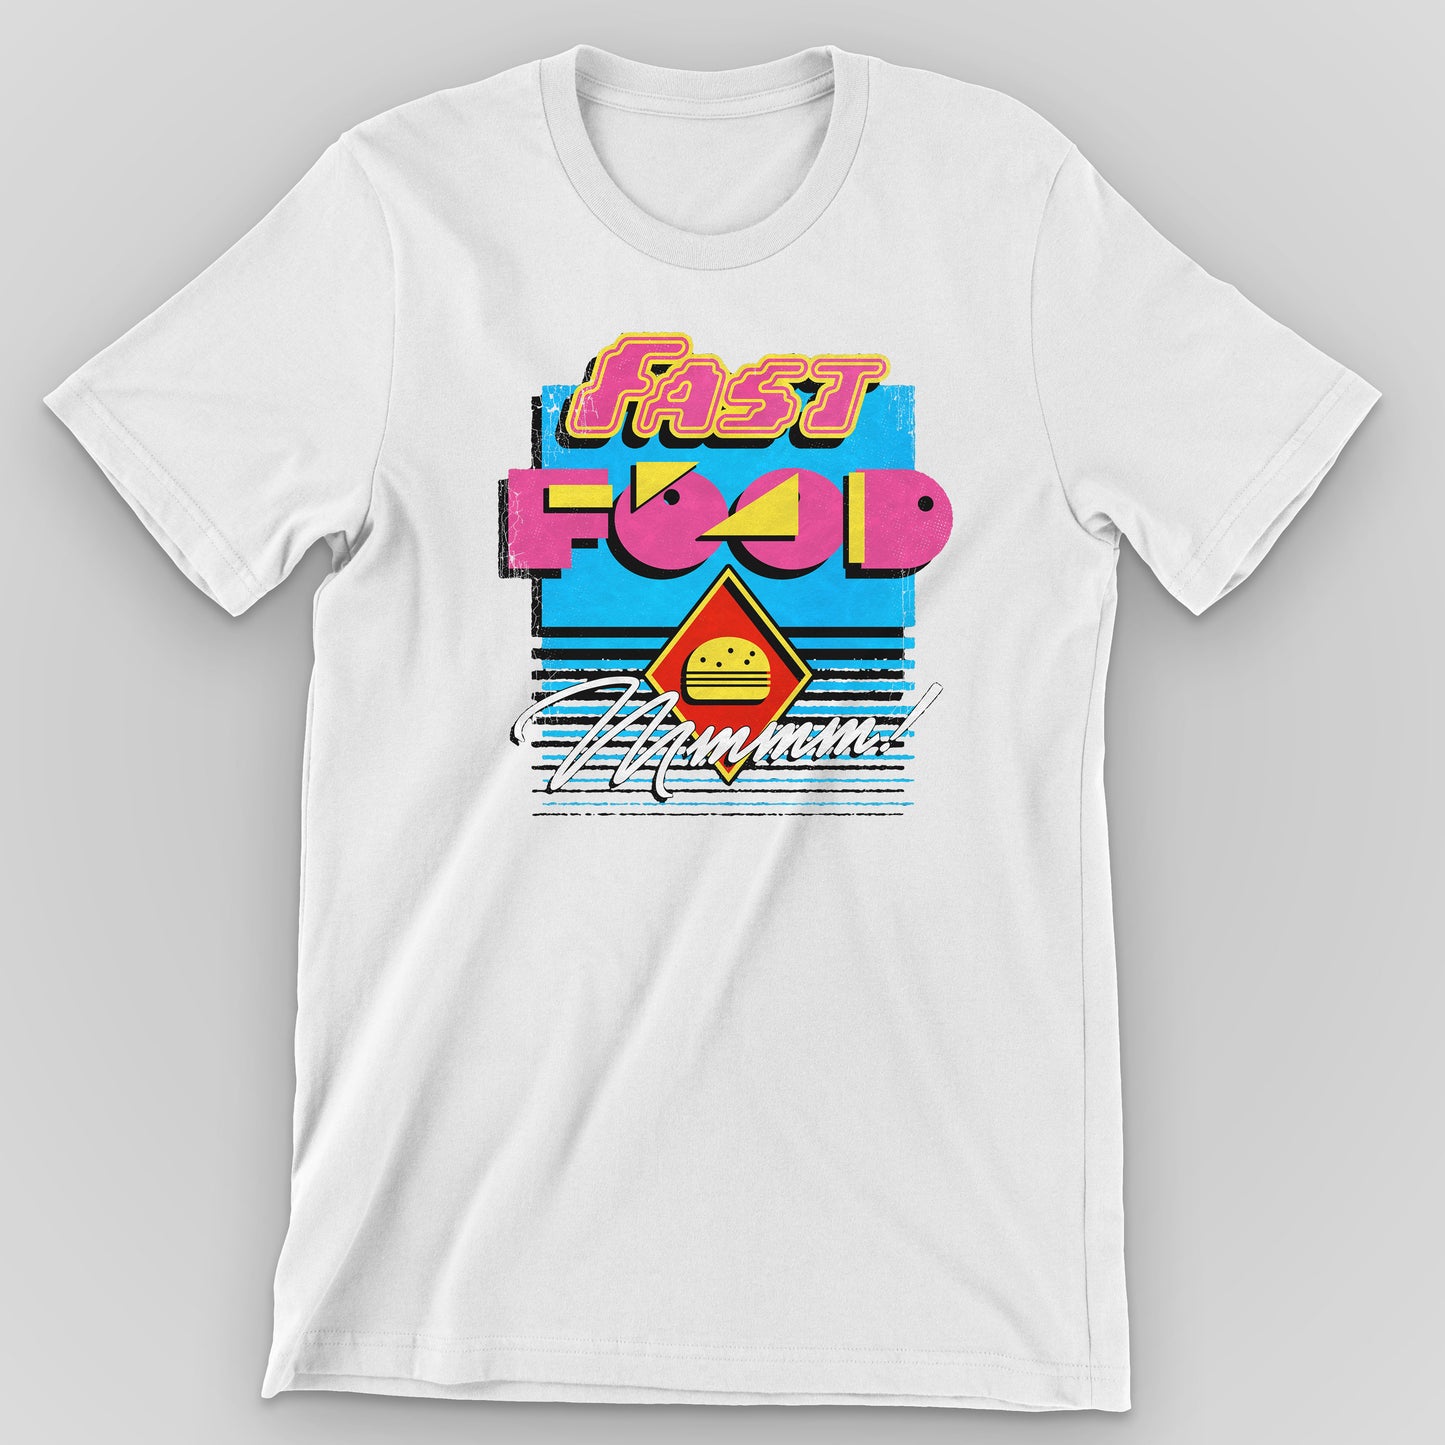 White 90s Fast Food Graphic T-Shirt by Snaxtime